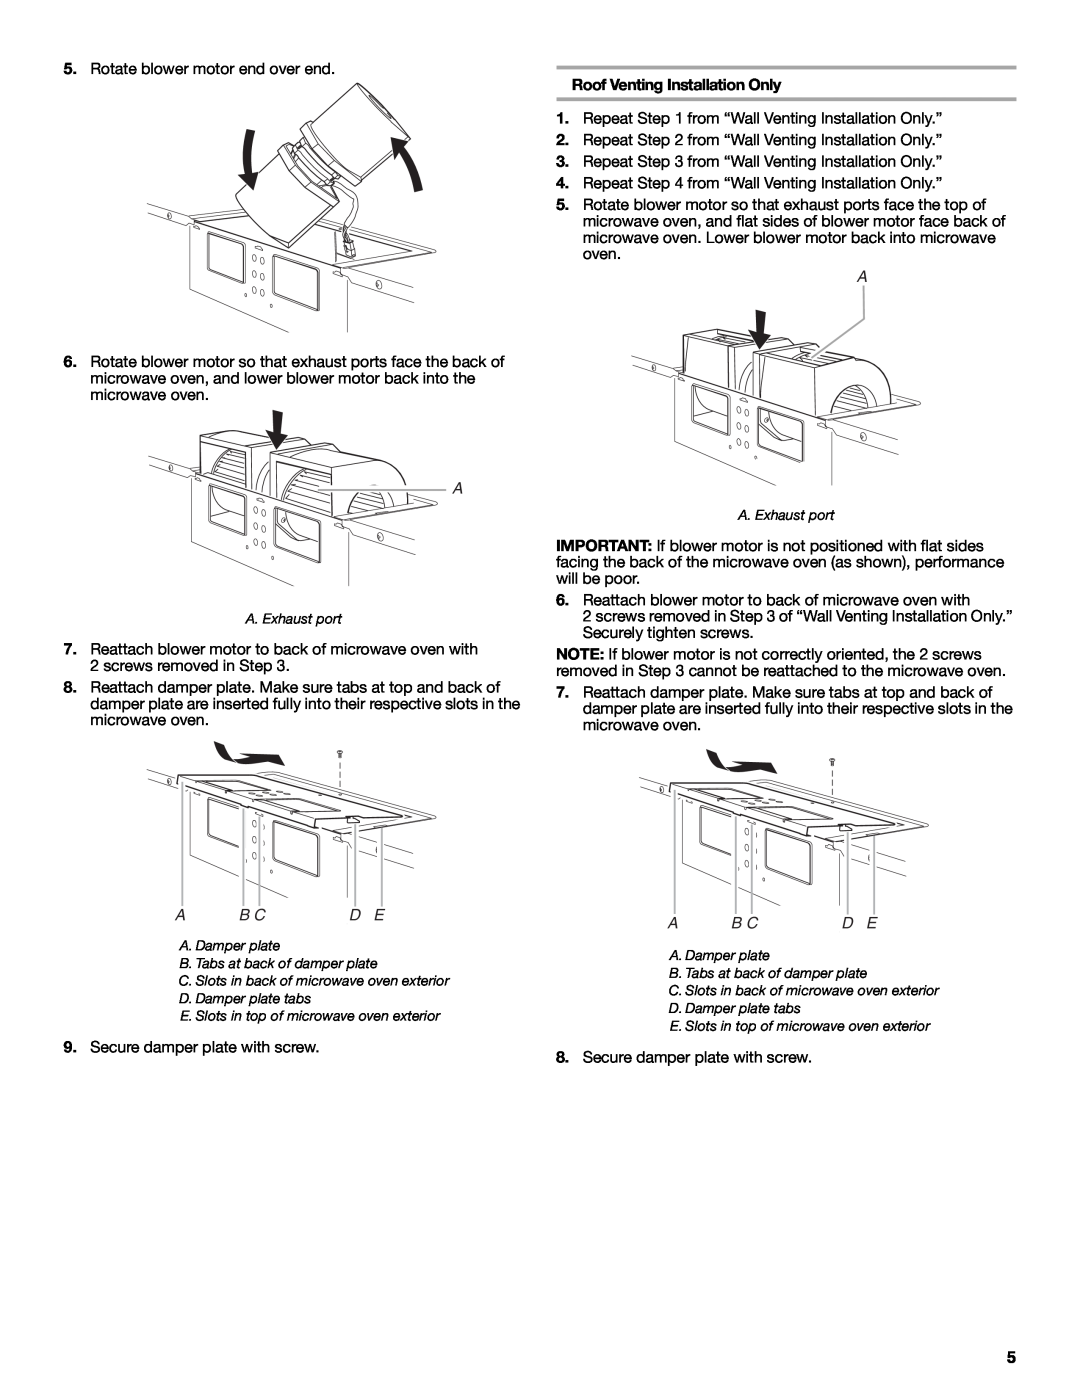 Whirlpool MH3184XPS5 installation instructions A B Cd E, Roof Venting Installation Only 